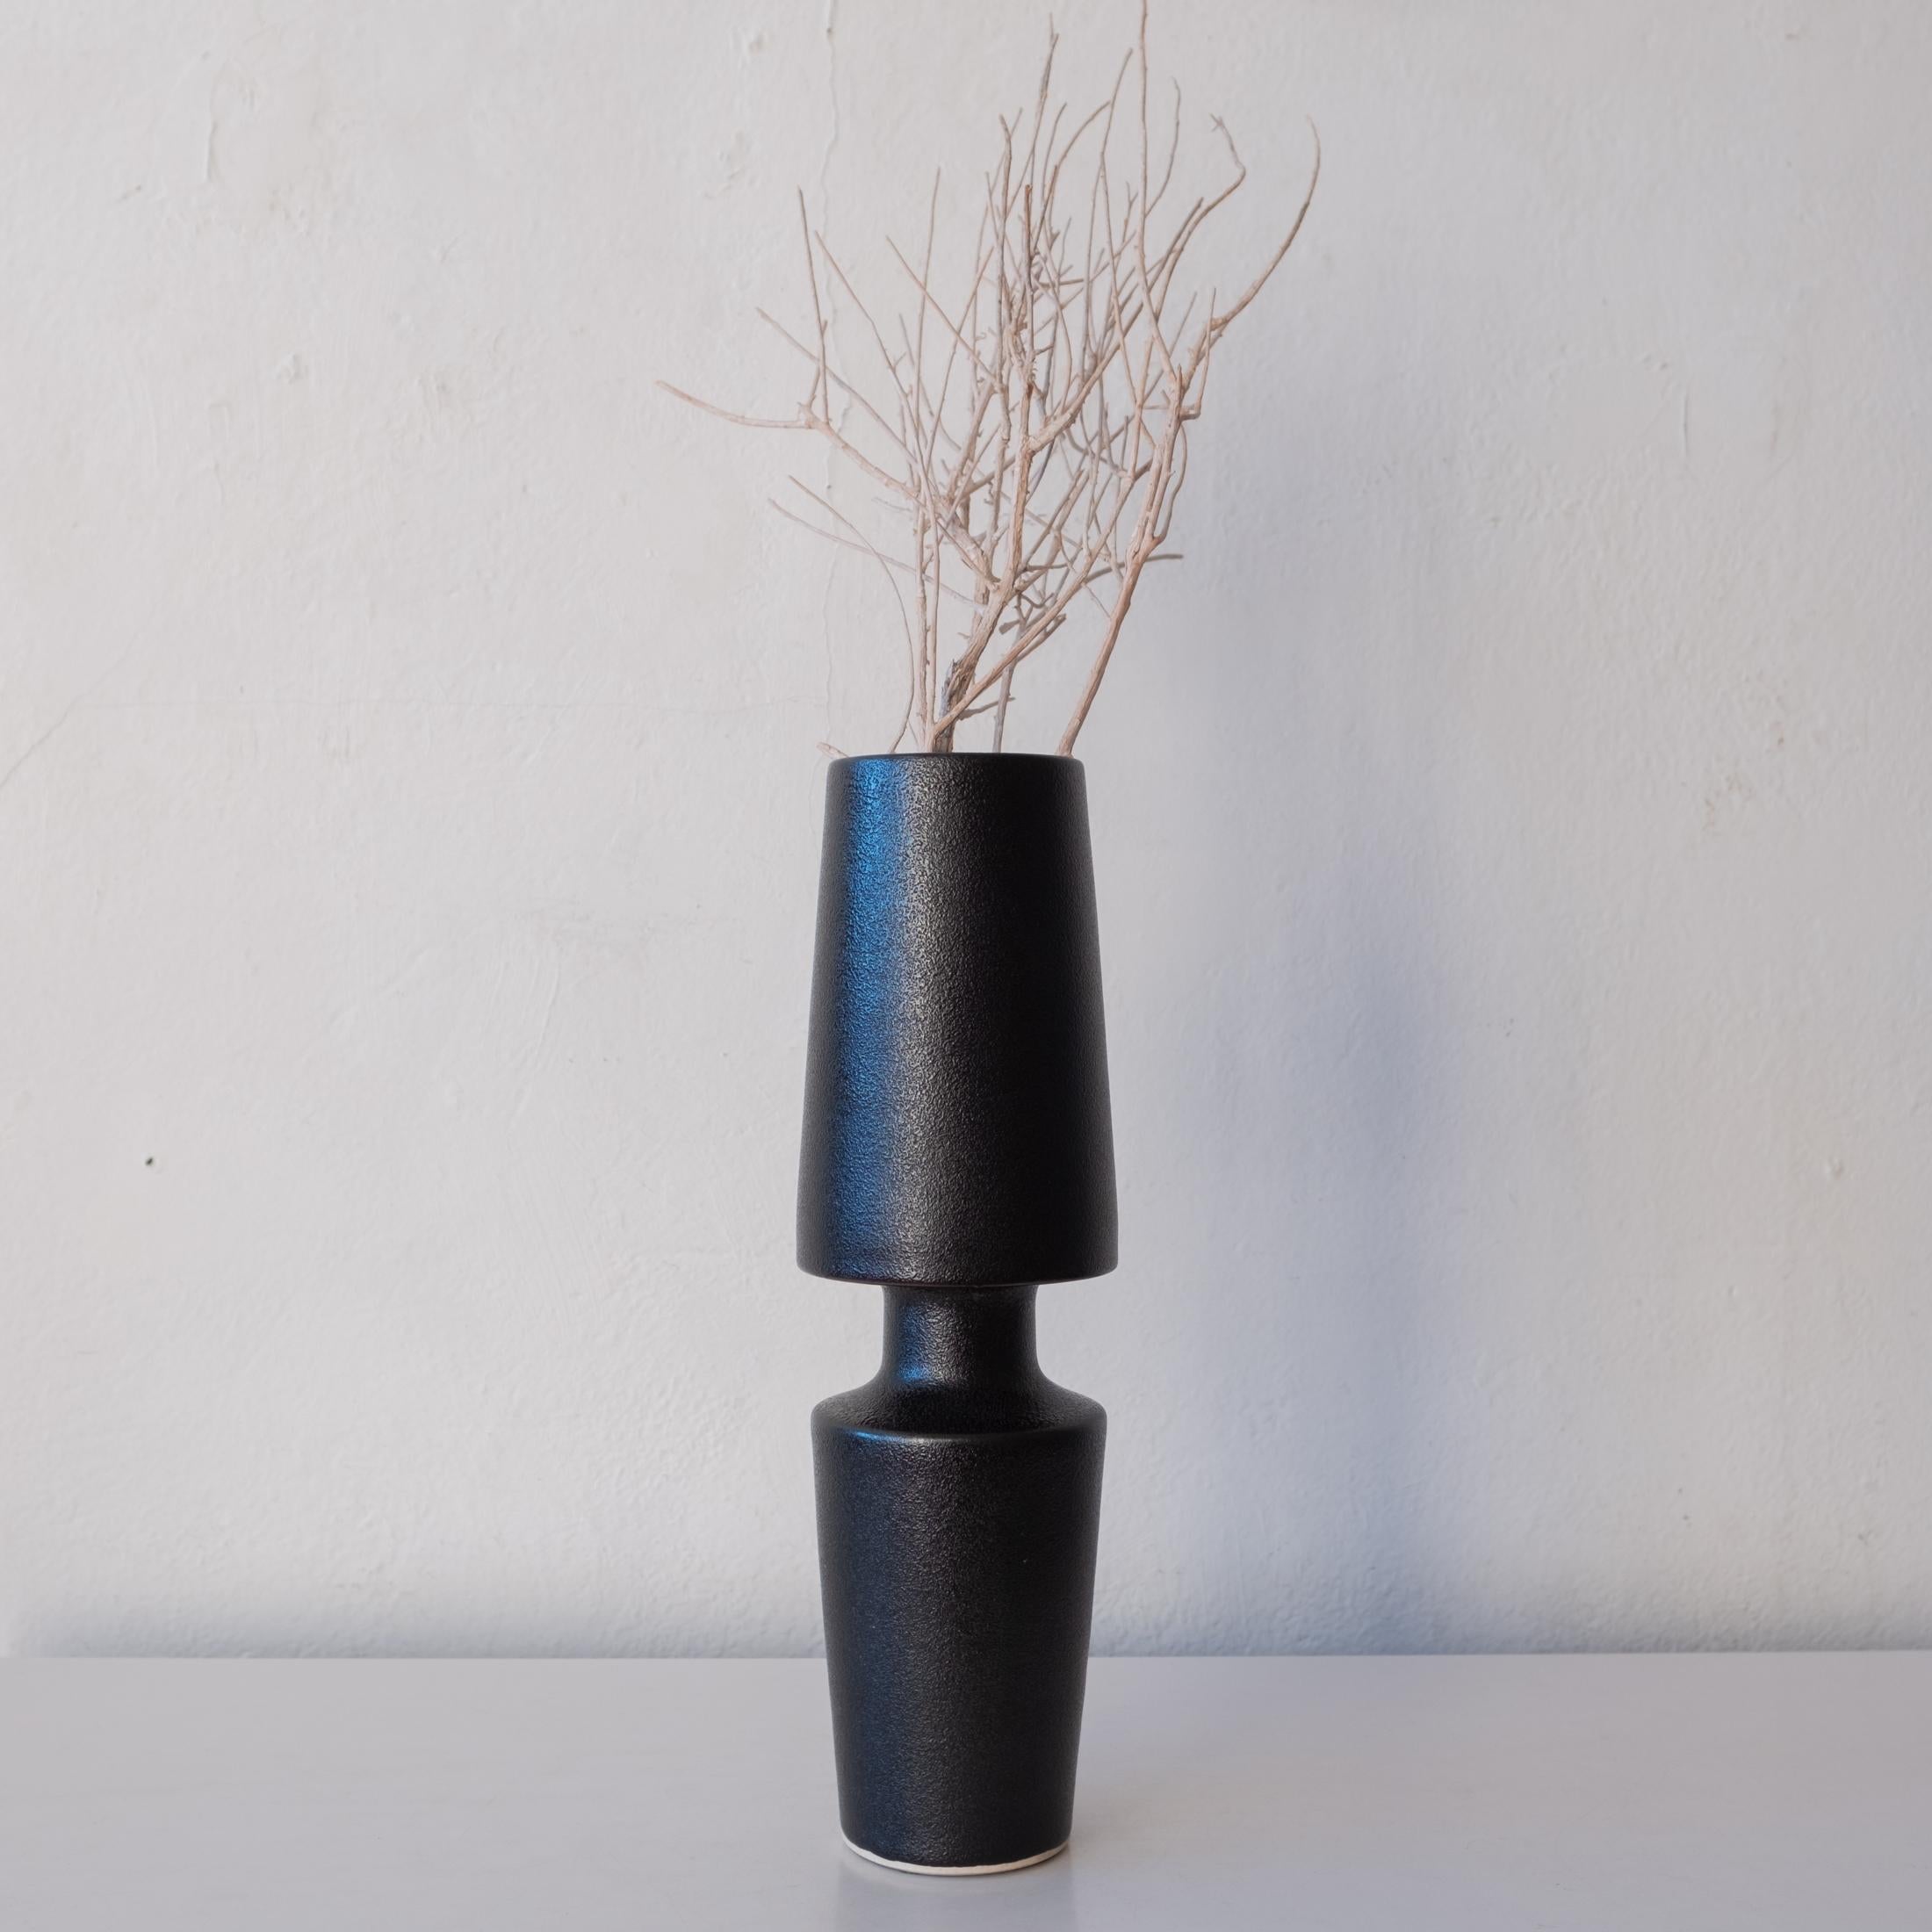 Modernist Ikebana vase with a textured surface. A quality piece with good weight and expertly crafted. Japan, 1960s.